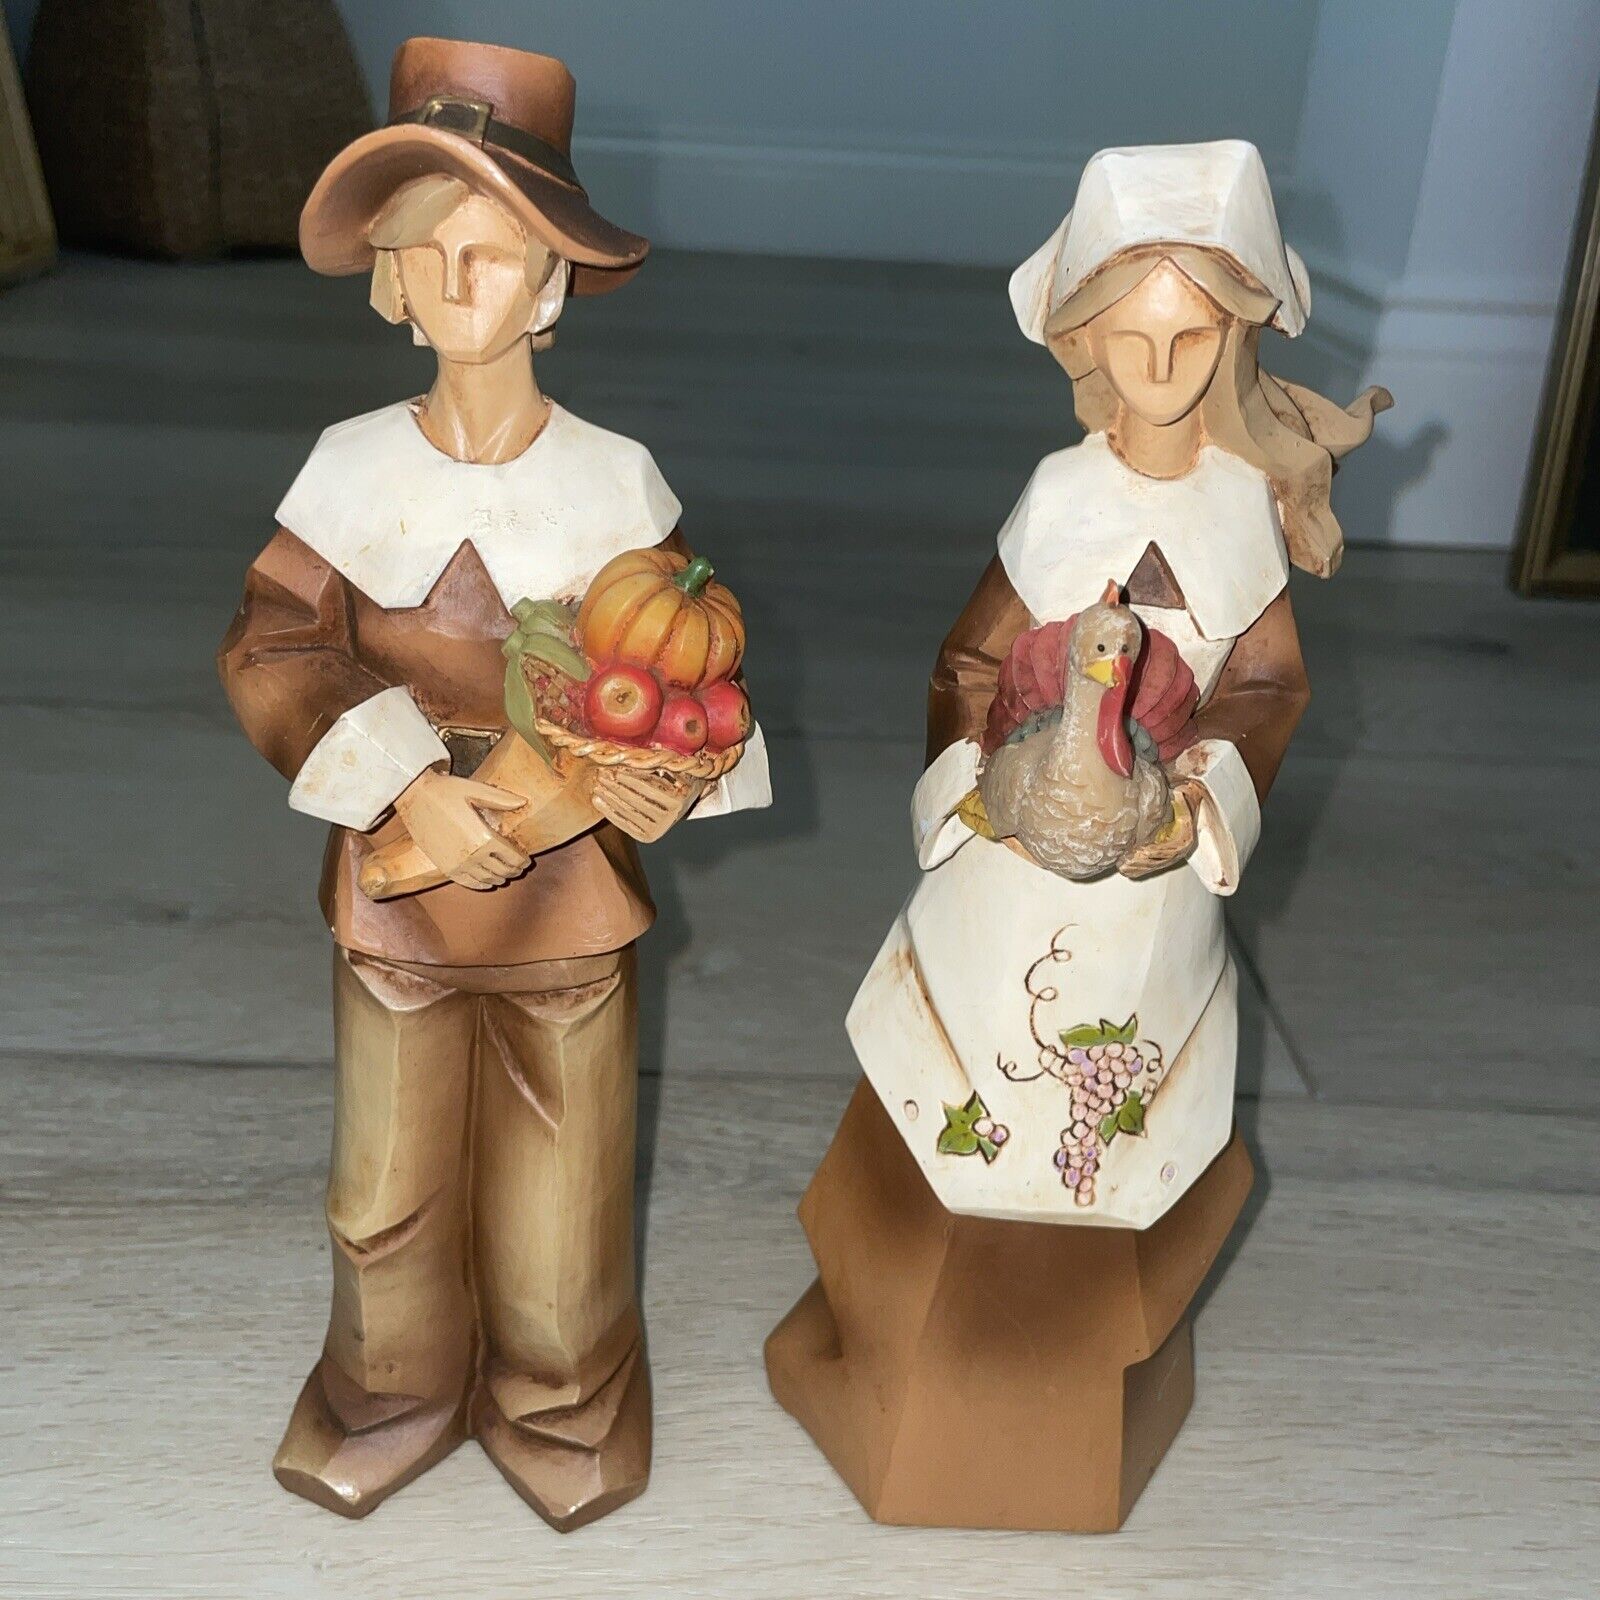 Pacific Rim Pilgrim Man and Woman Figurines Statues Thanksgiving Resin Cubist